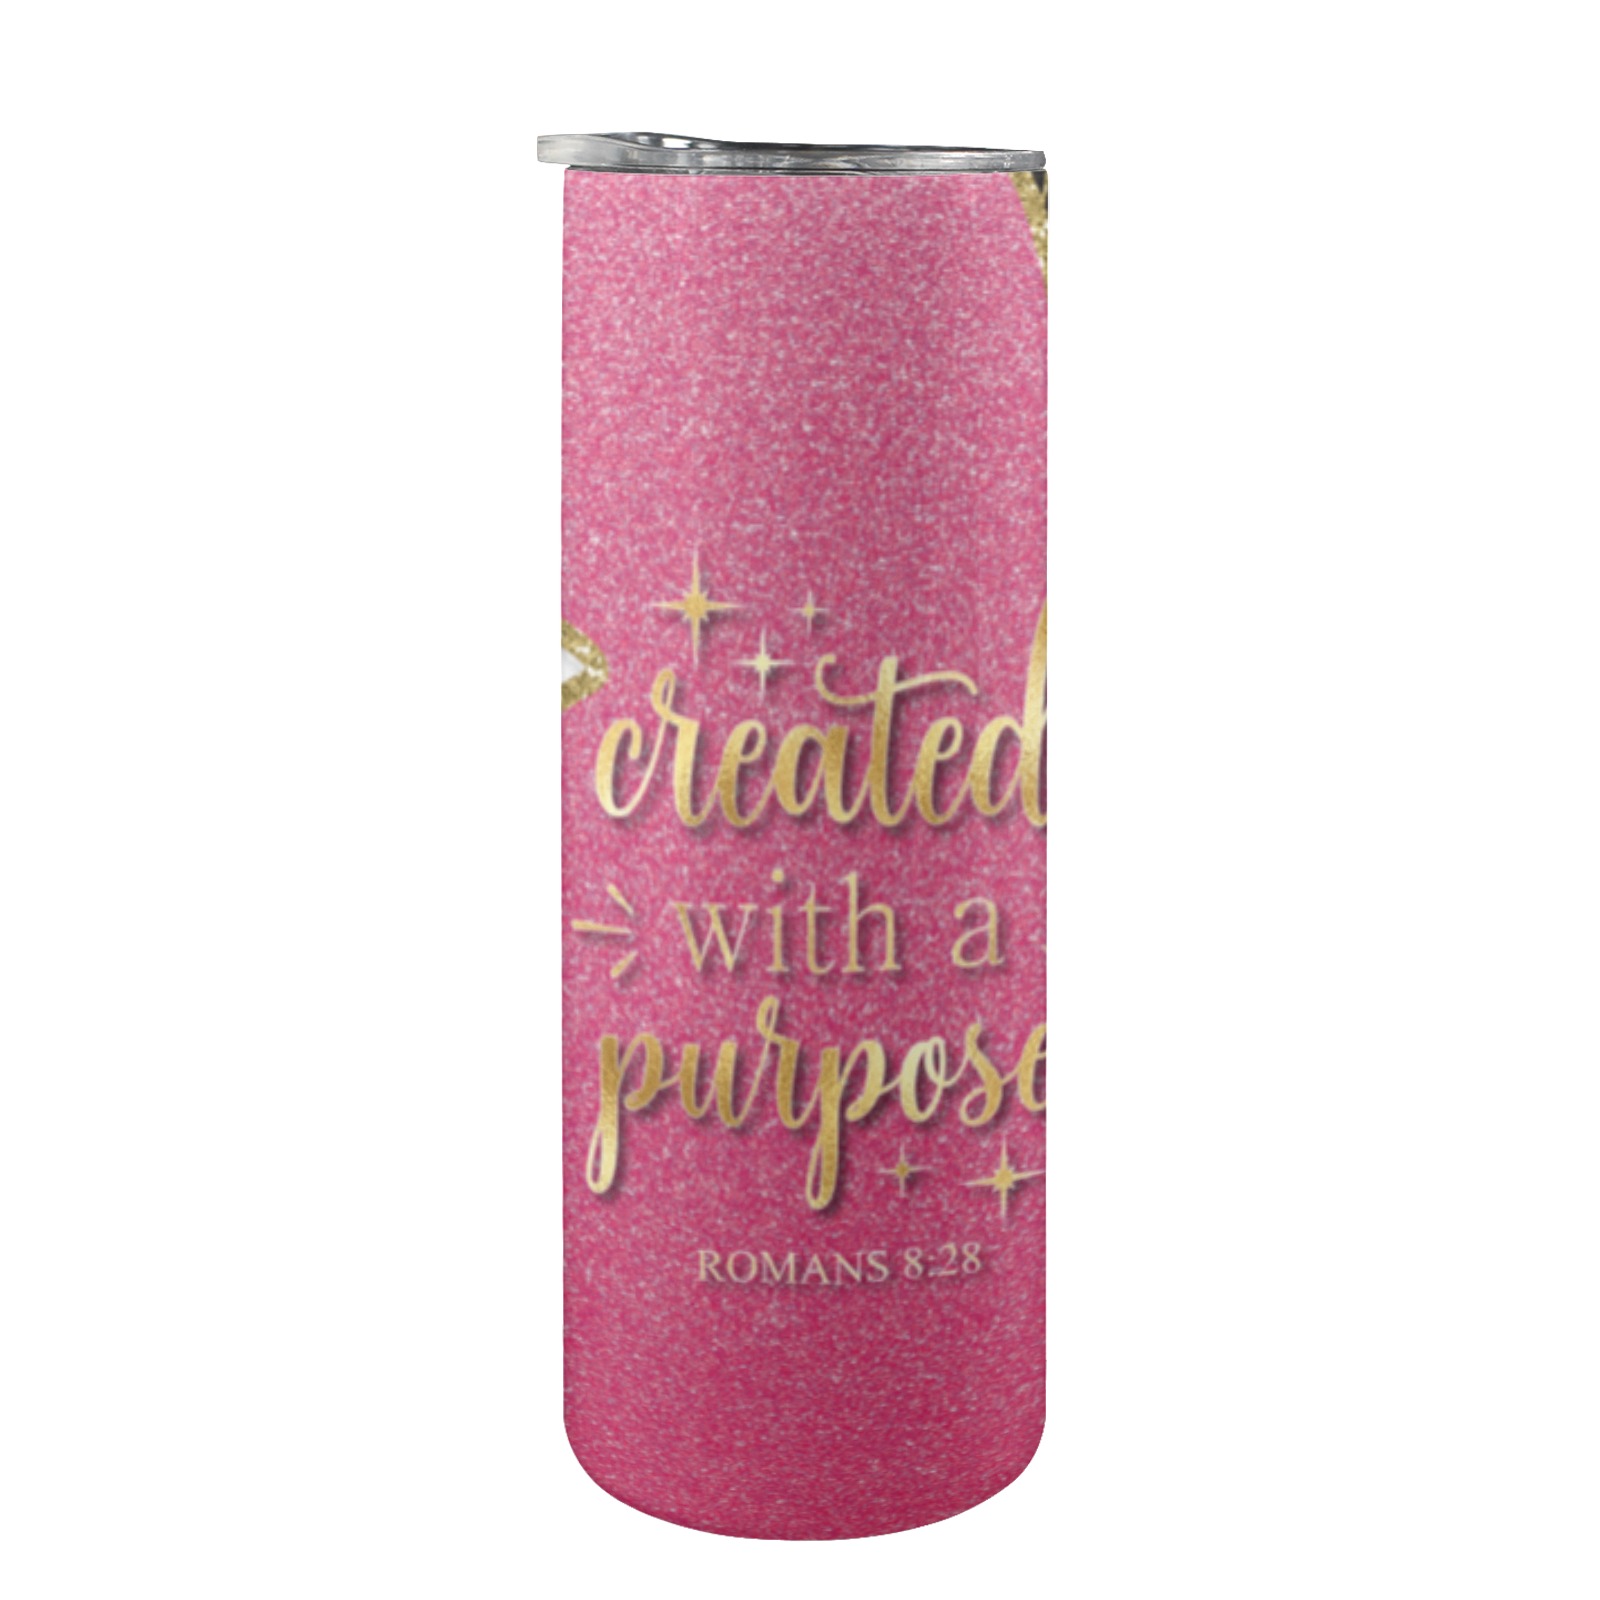 Bible verse tumbler - Created with a Purpose 20oz Tall Skinny Tumbler with Lid and Straw